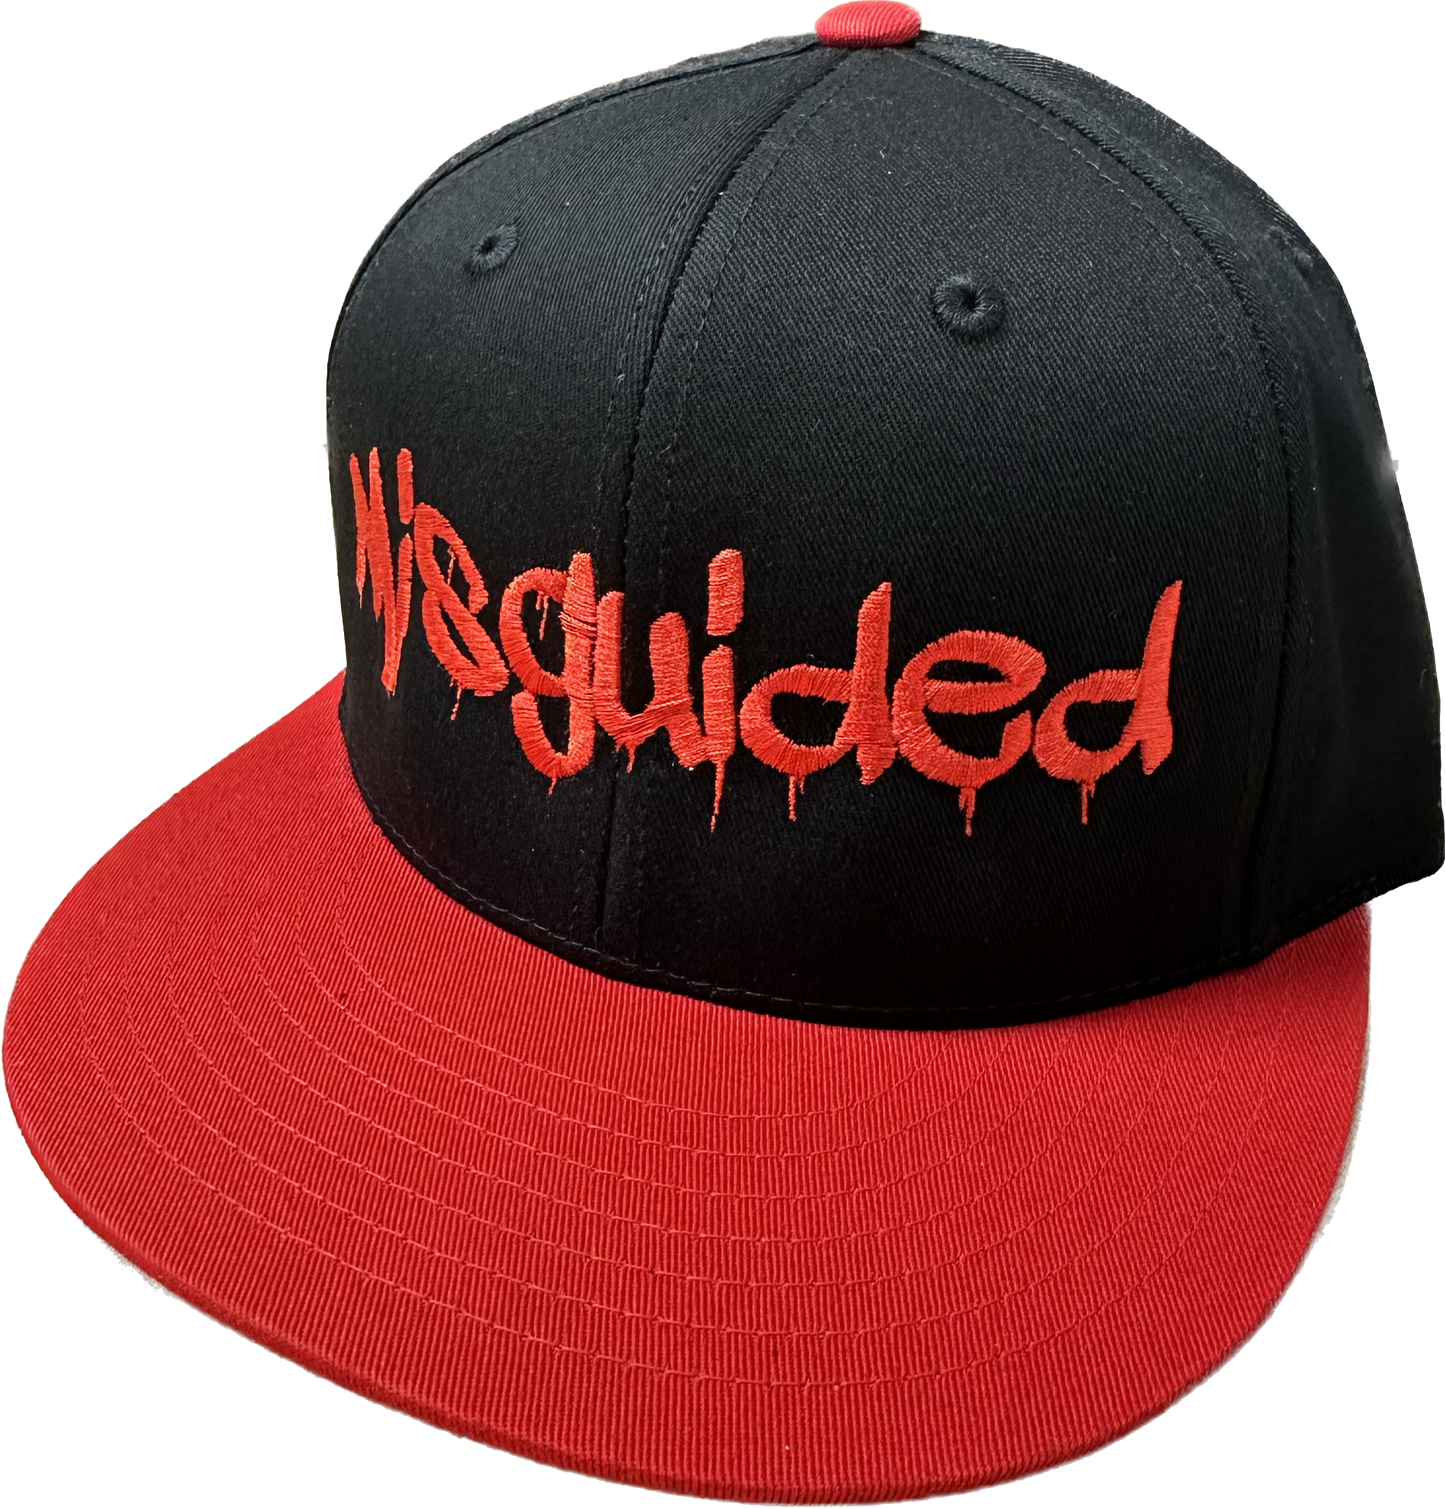 Cherry Misguided SnapBack